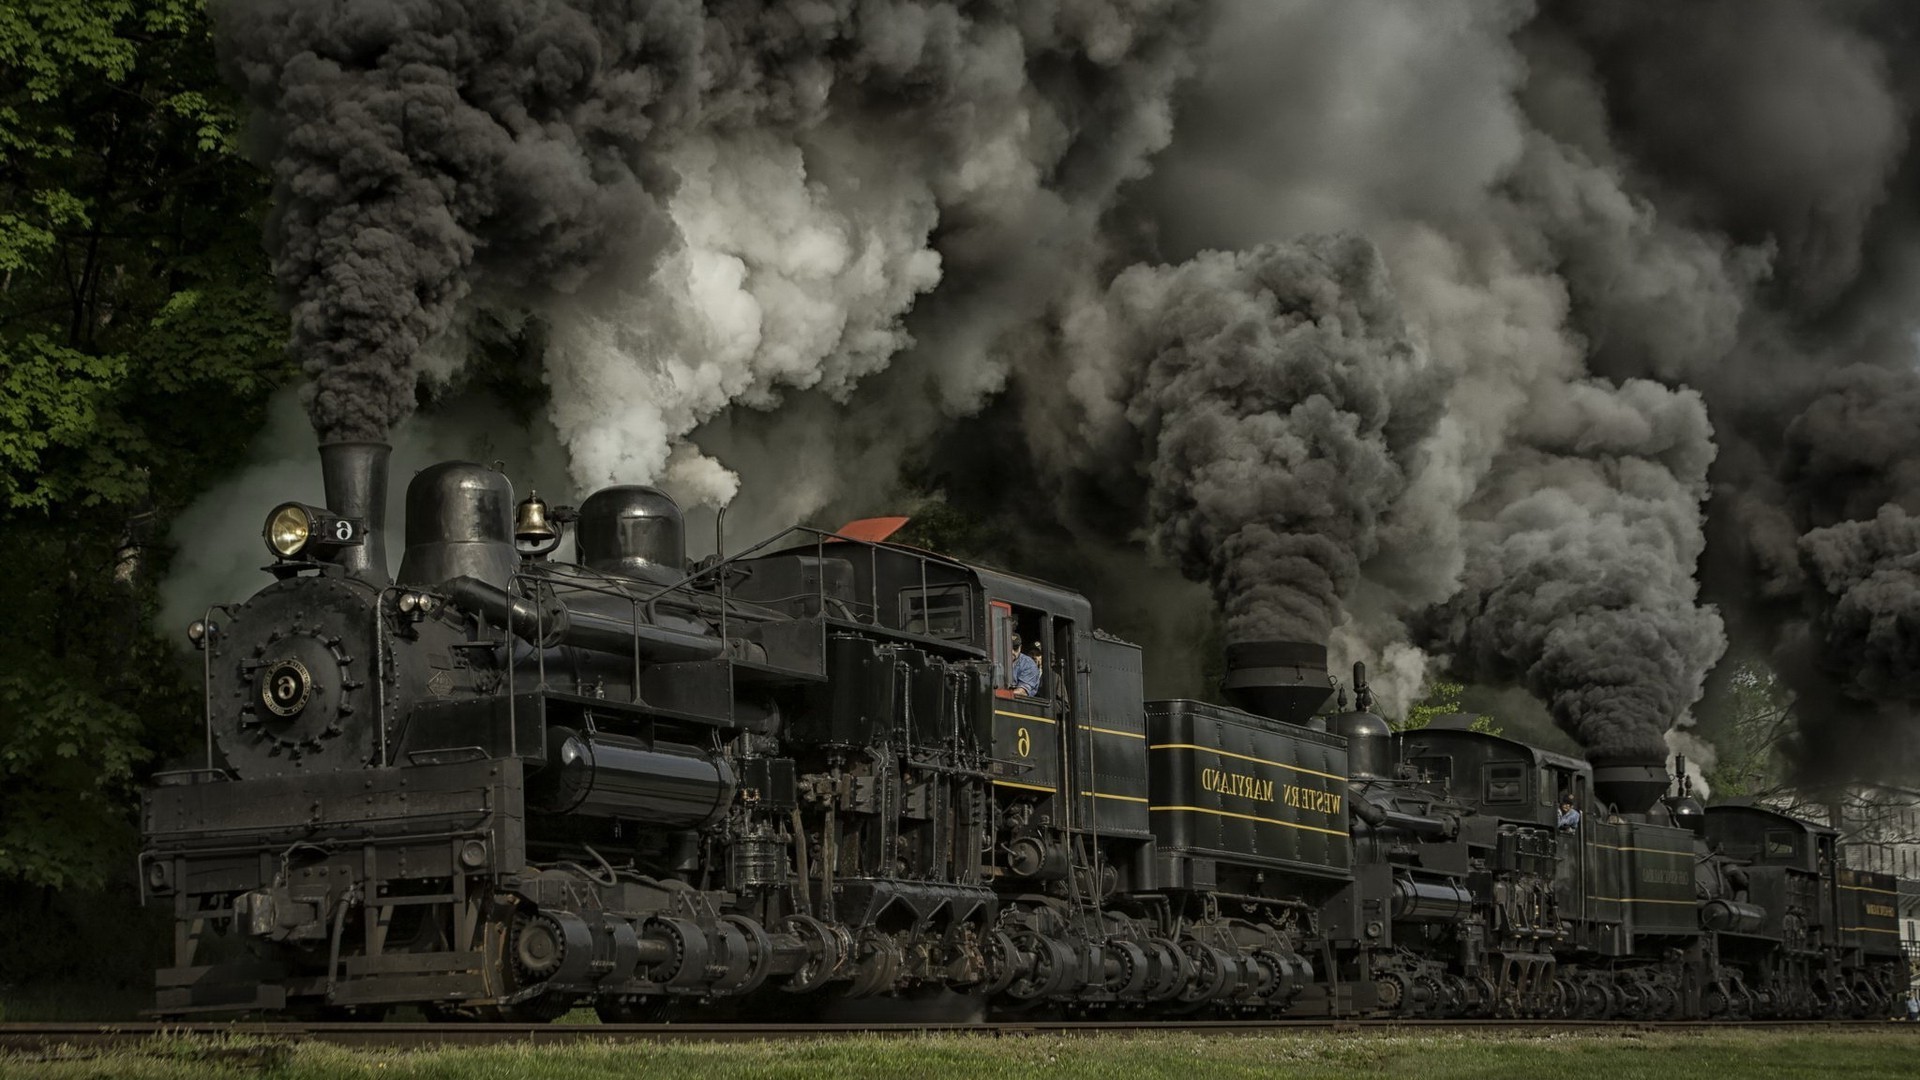 1920x1080 train, Steam Locomotive, Dust, Railway, Wheels, Maryland, USA, Nature,  Trees, Grass, Smoke Wallpapers HD / Desktop and Mobile Backgrounds